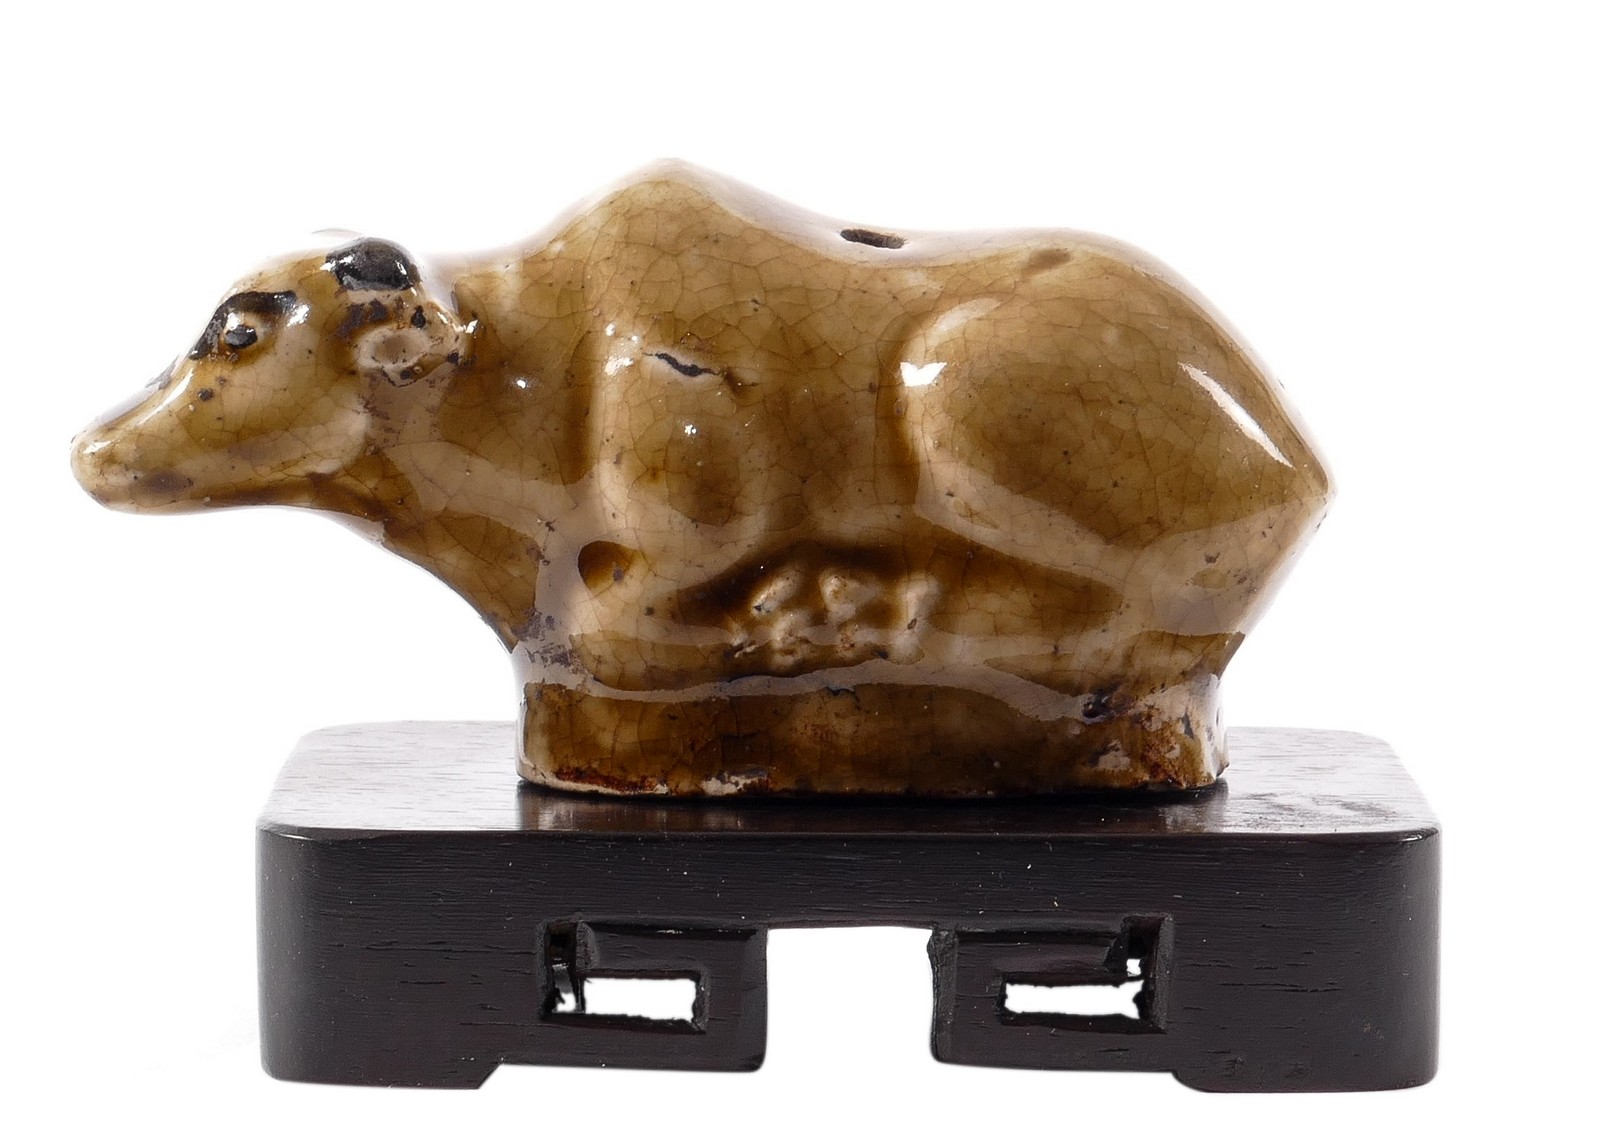 A Chinese stoneware glazed buffalo on a wooden base, H 5 - W 10 cm (base included)